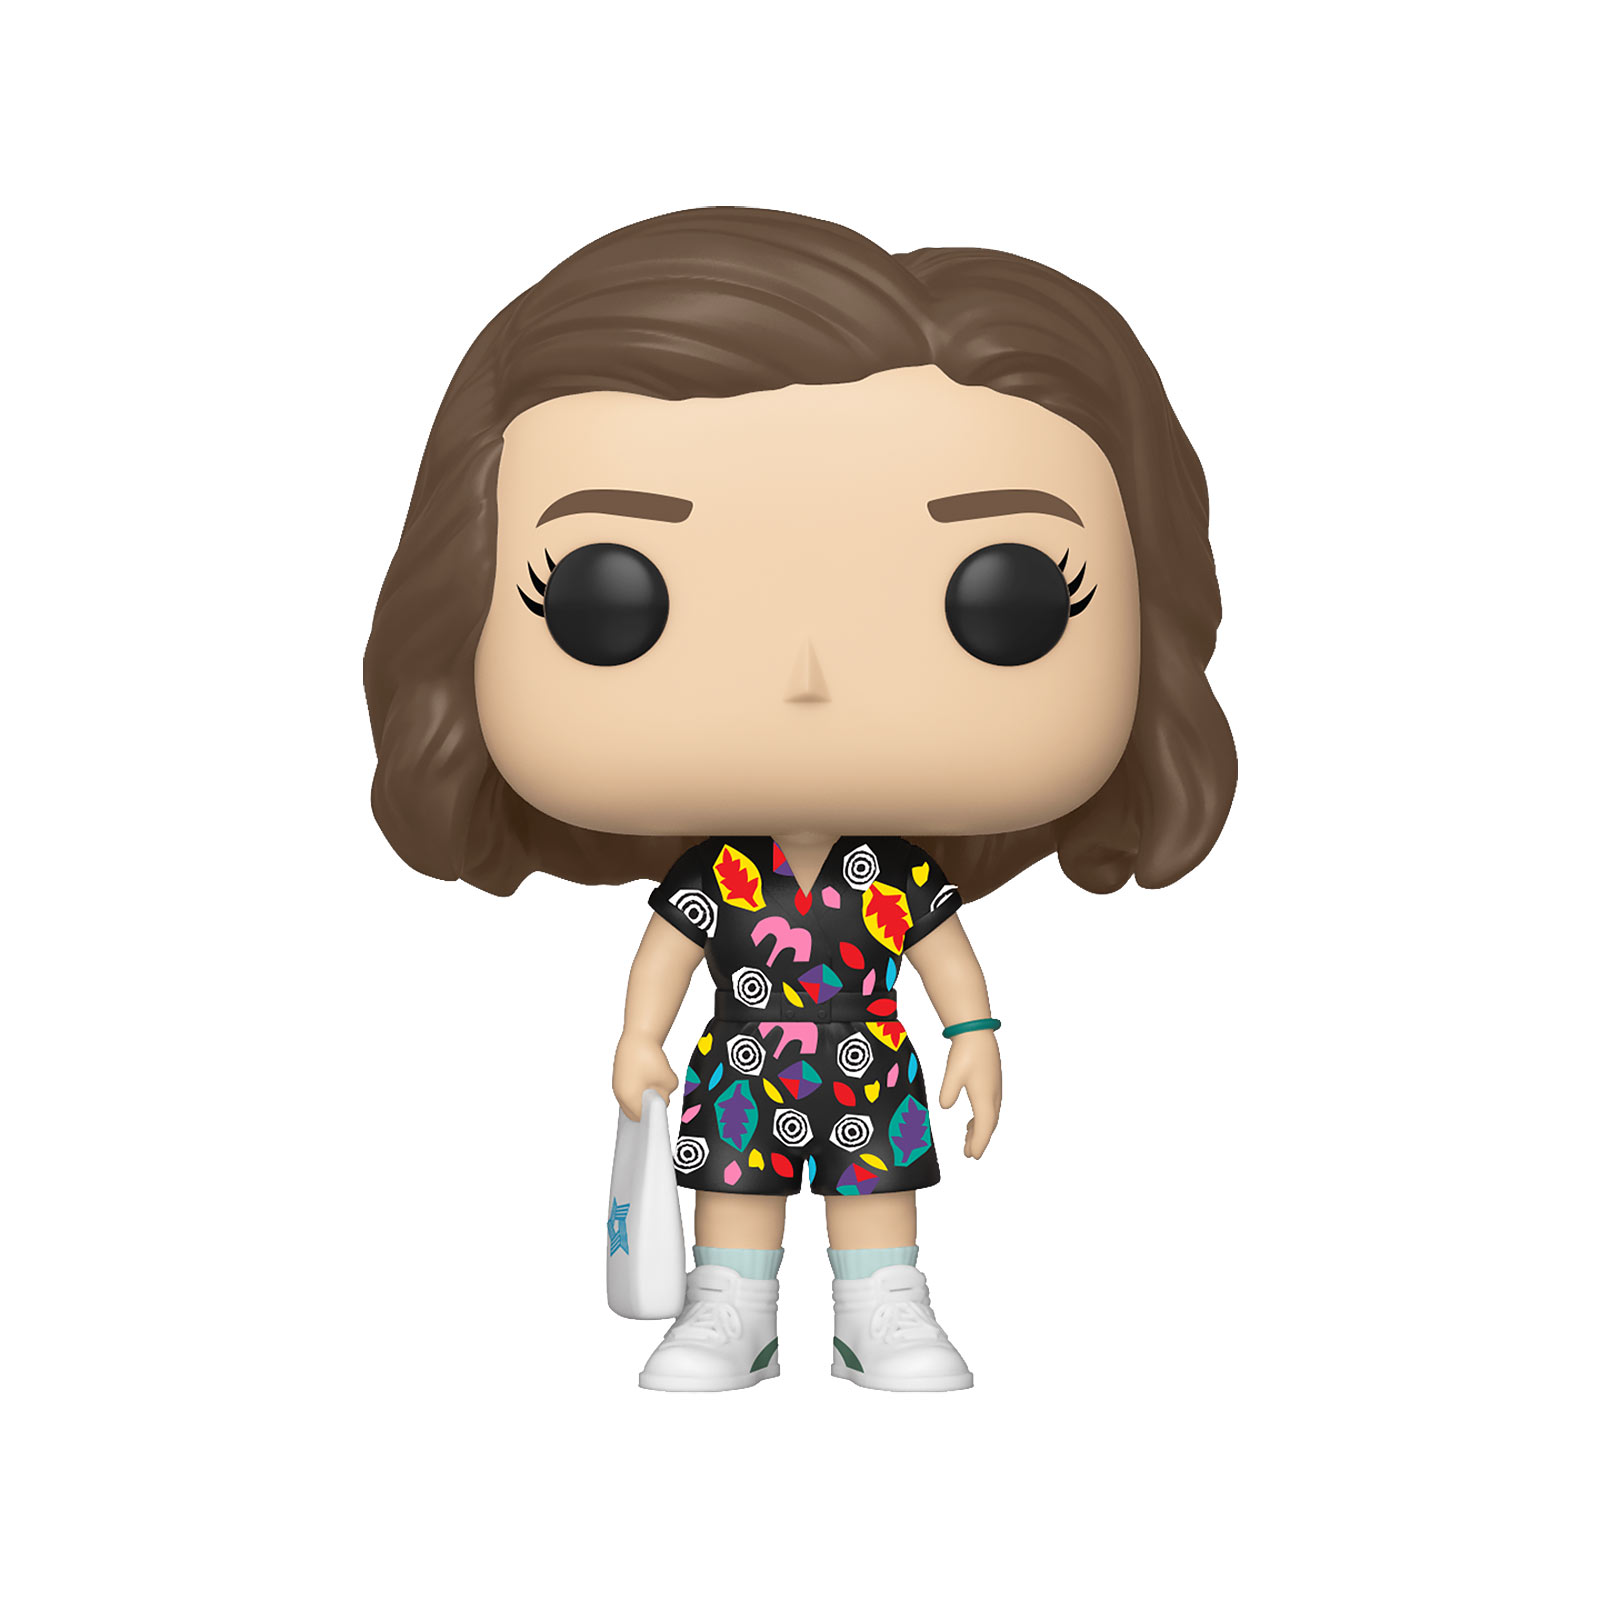 Stranger Things - Eleven in Mall Outfit Funko Pop Figure